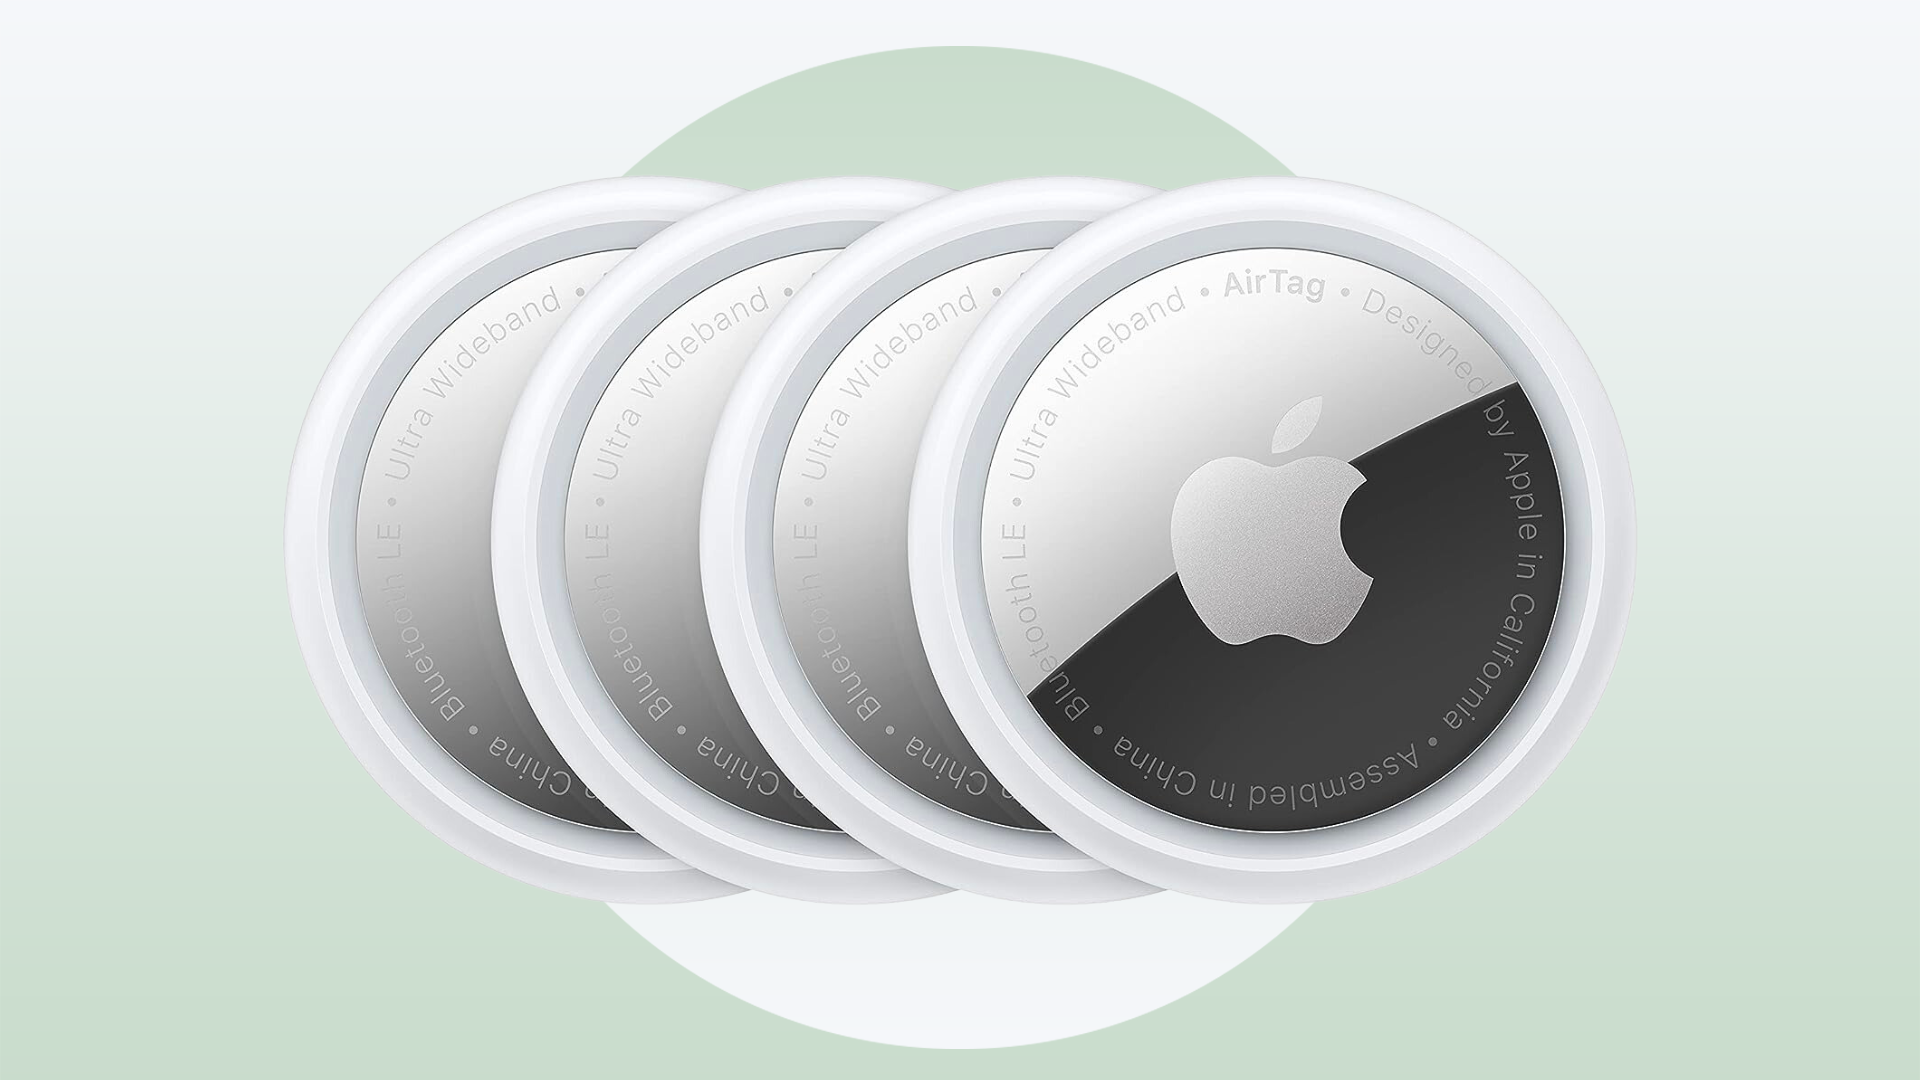 We found Apple AirTags at a rare discount — get four for just $20 each